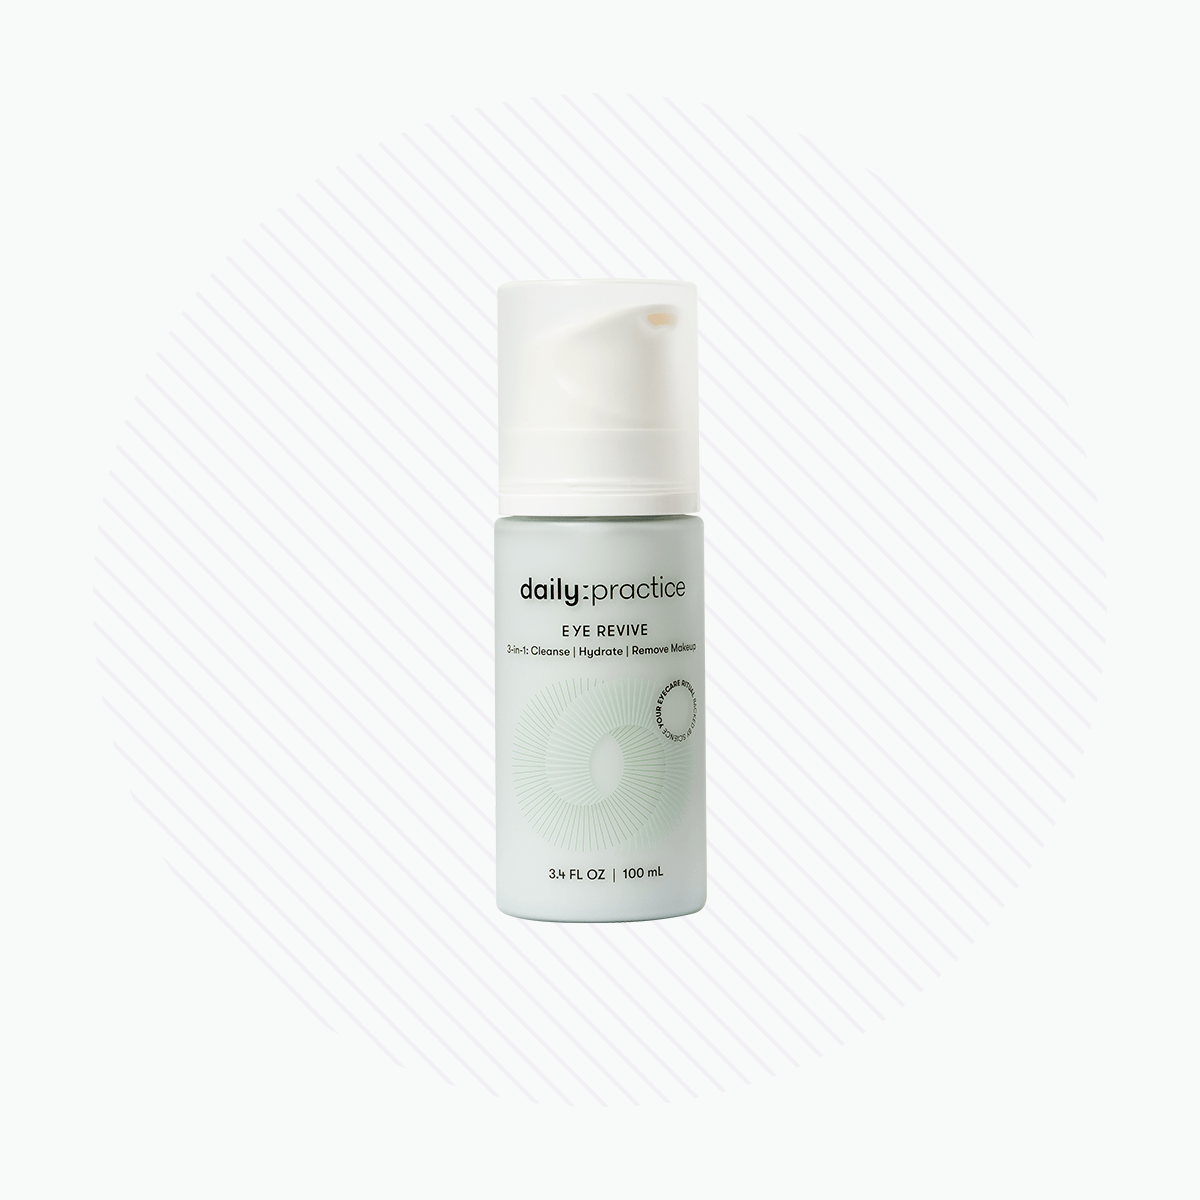 Daily Practice - Eye Revive Foam - 3-in-1 Eye Care Cleanser to Cleanse, Hydrate and Brighten Around the Eyes (3.4oz Bottle) 100ml - Dryeye Rescue